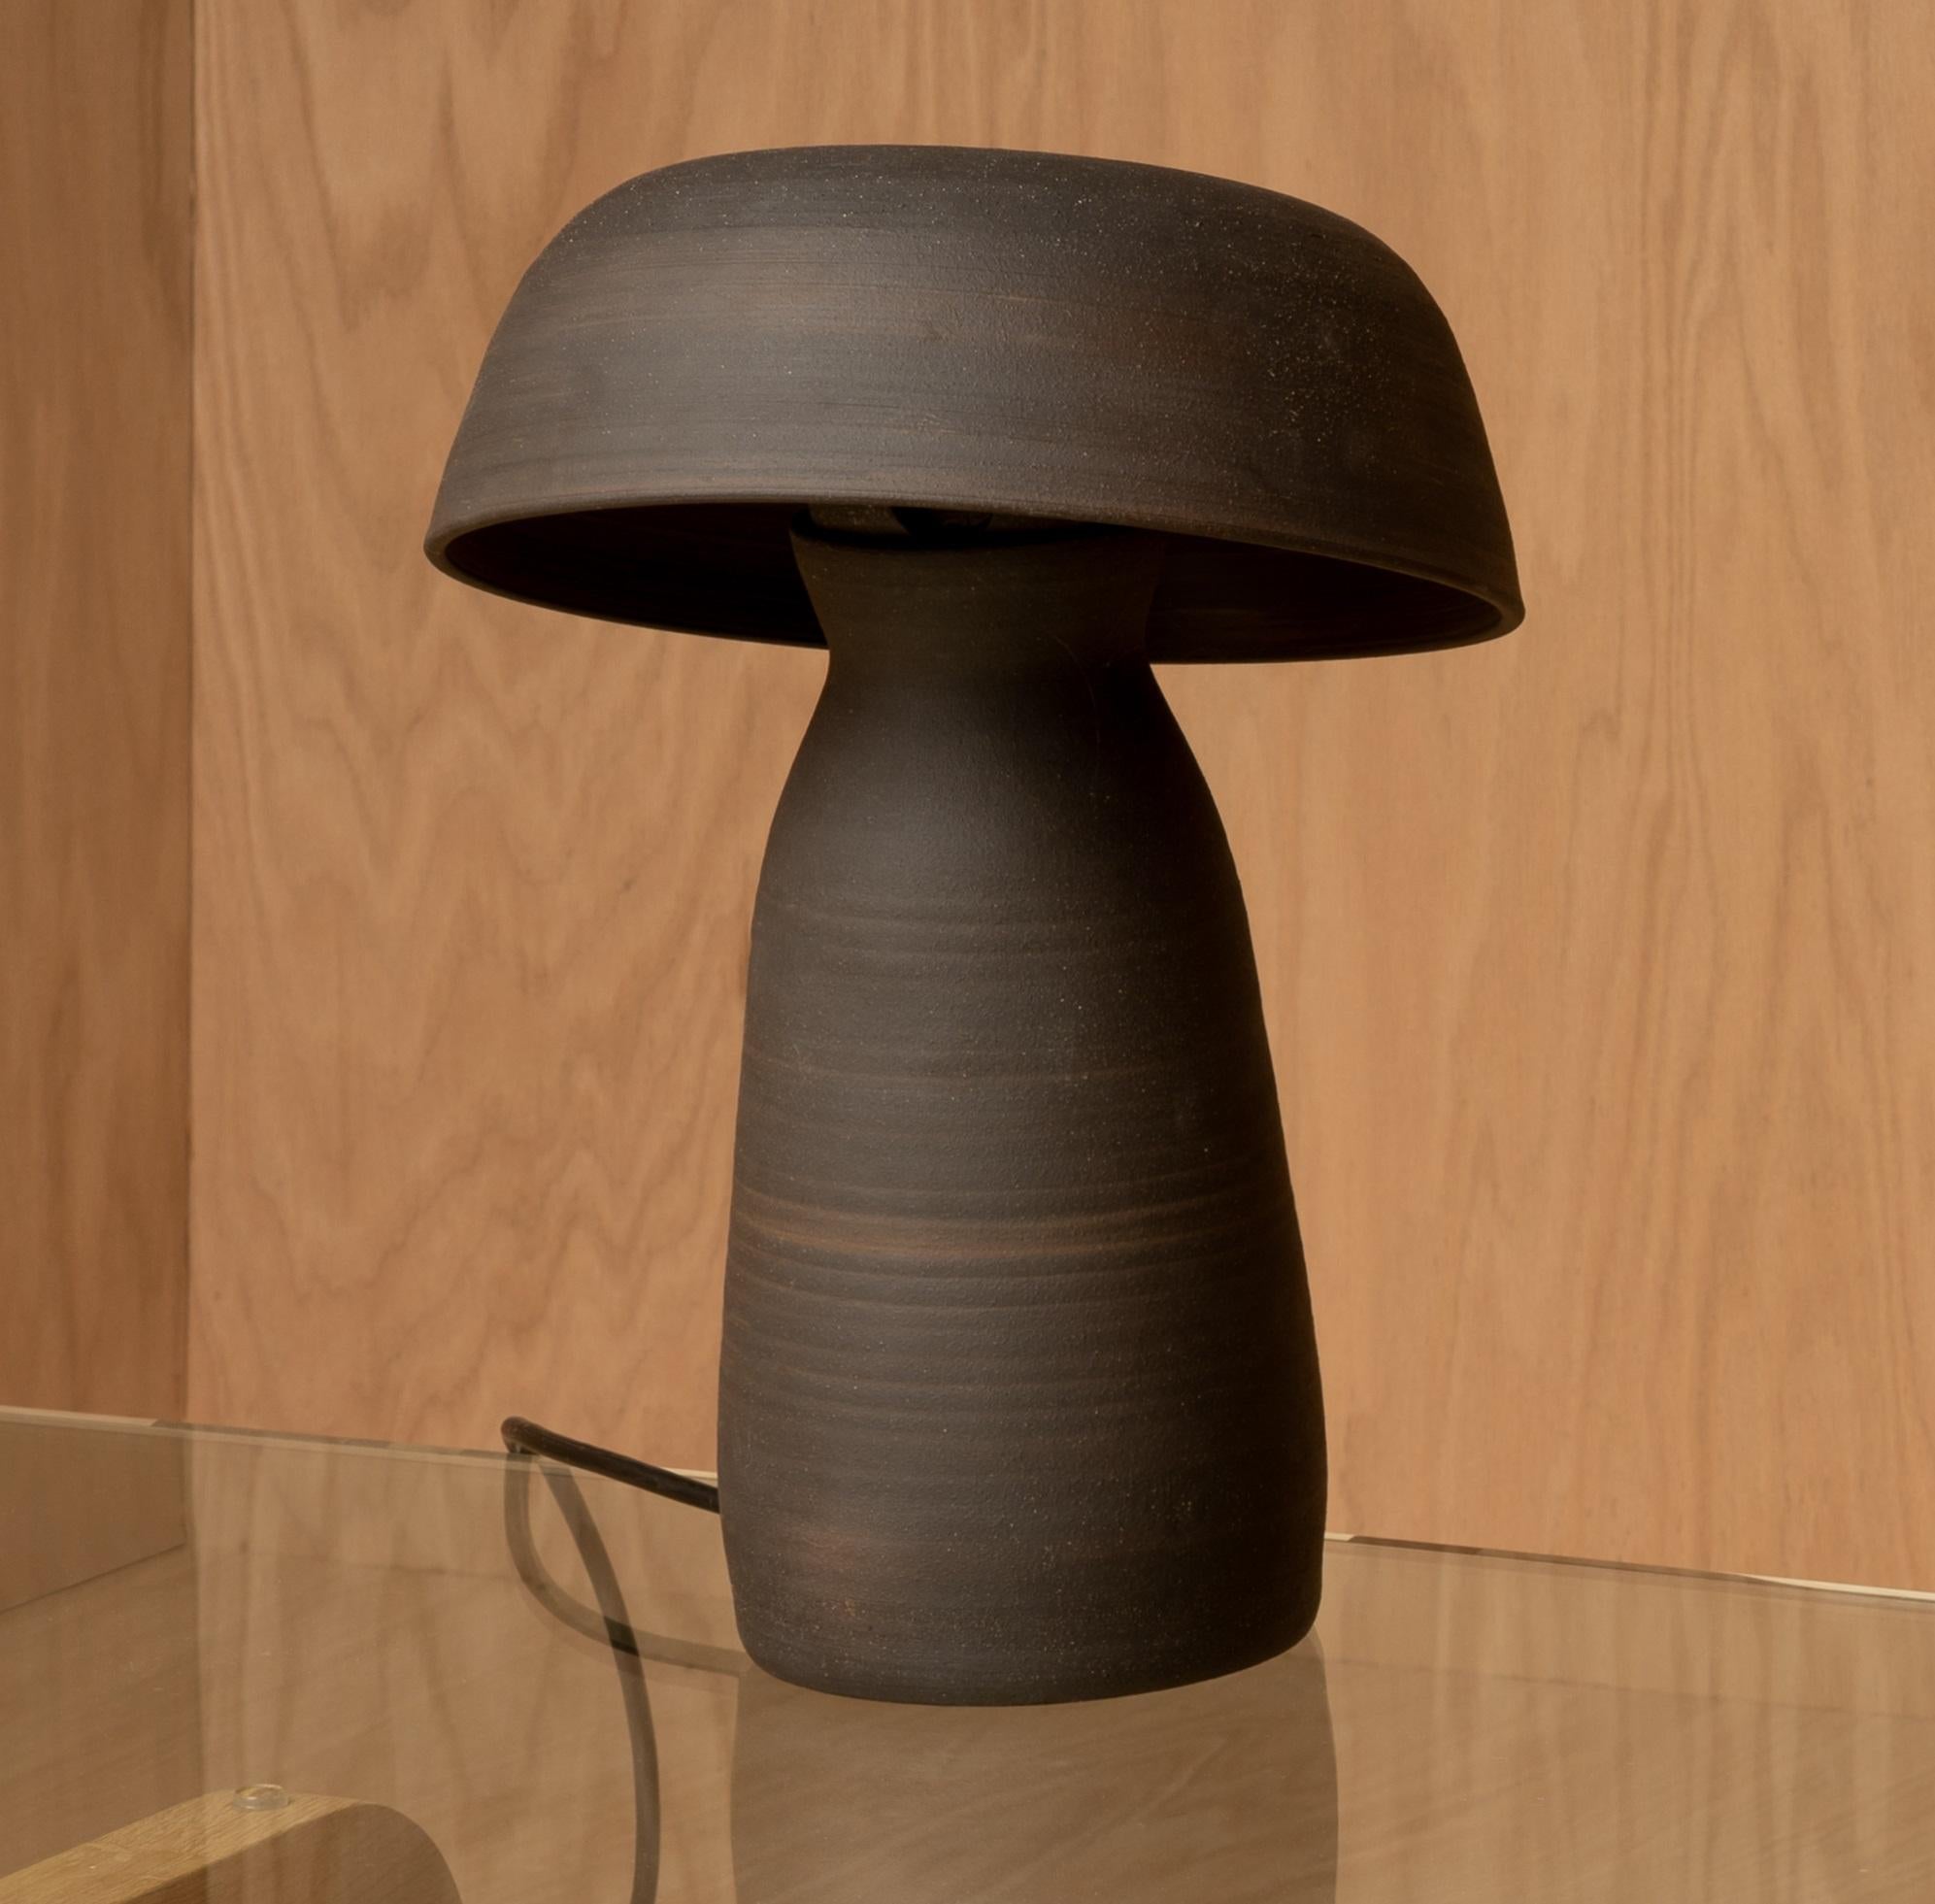 Hand-Crafted Terra-Cotta Raw Small Mushroom Lamp by Nick Pourfard For Sale